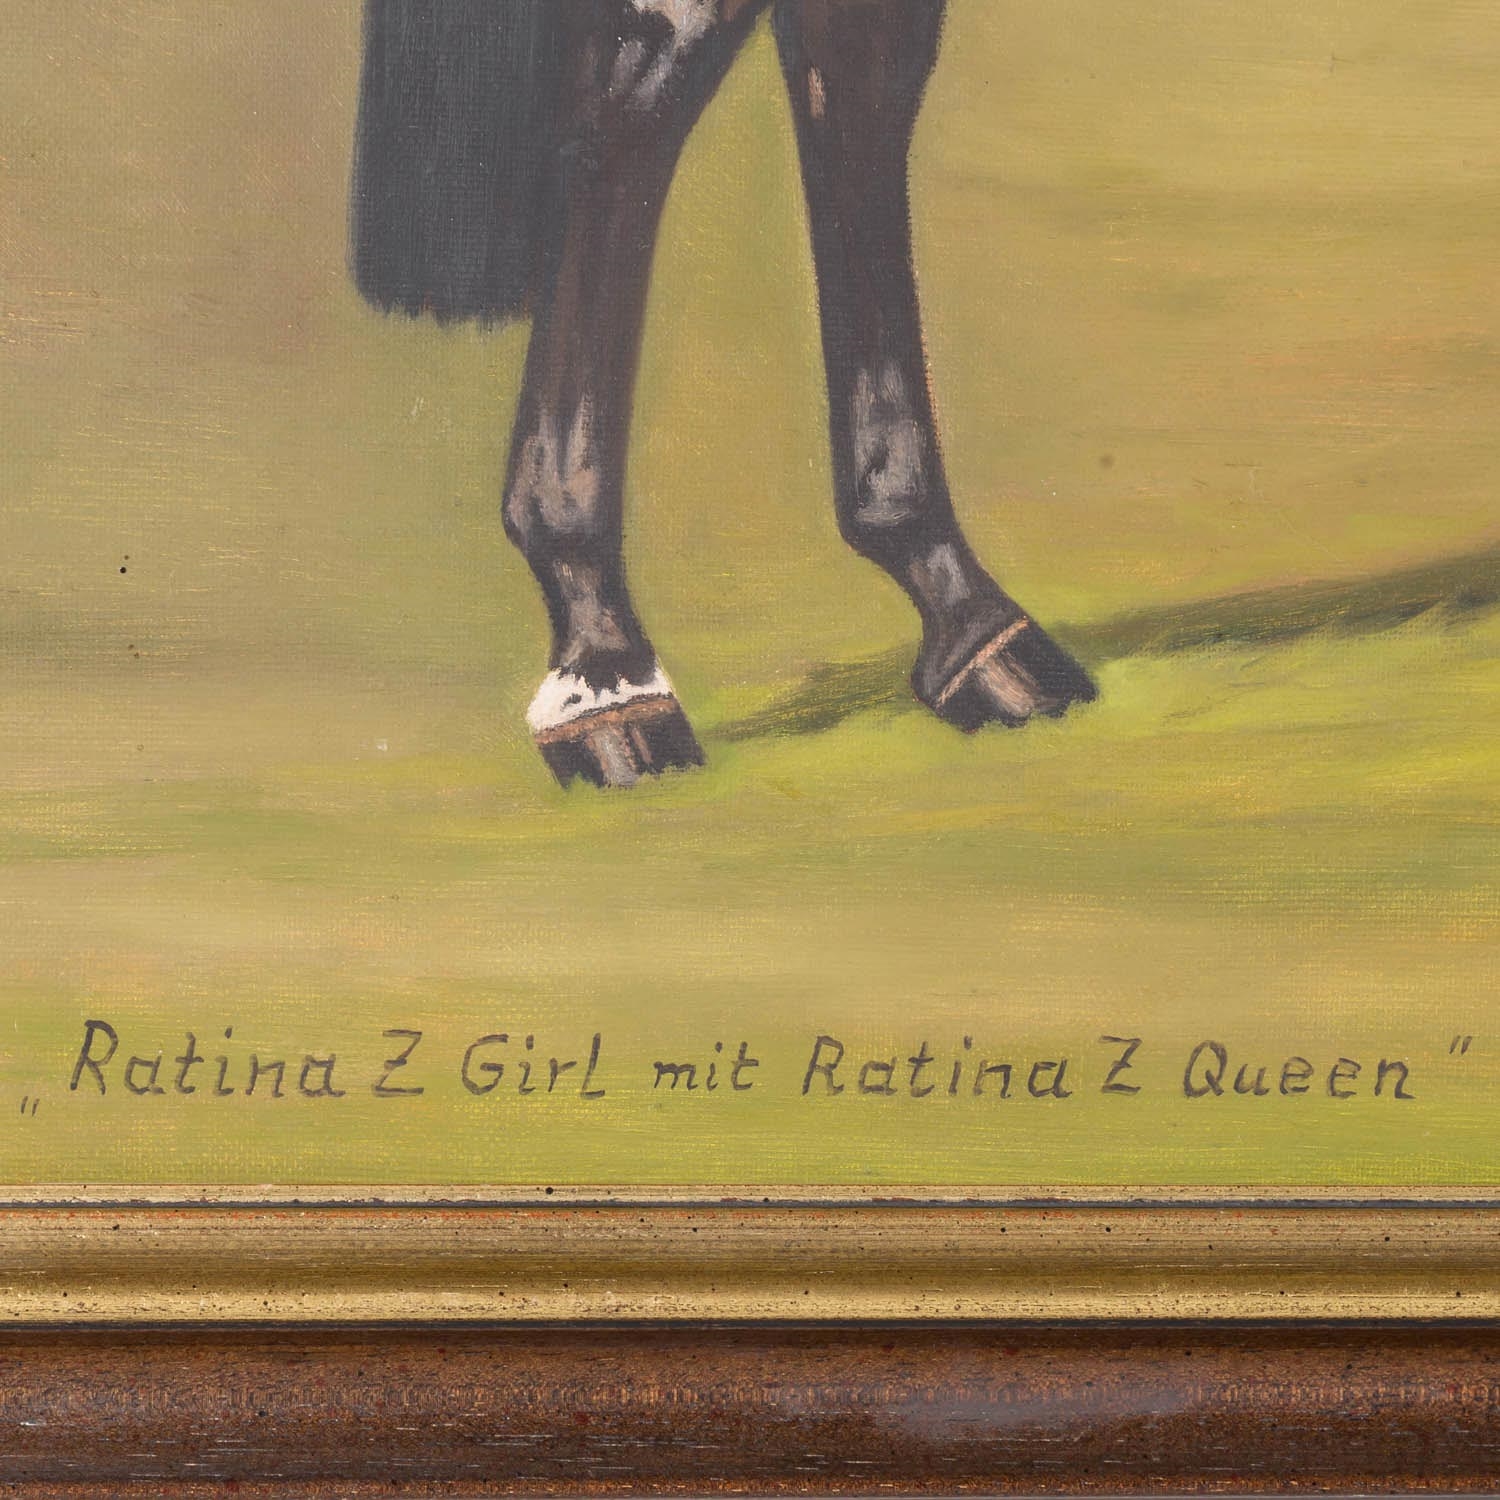 Artwork by Struck, Karl-ernst, Ratina Z Girl with Ratina Z Queen, Made of oil/ canvas